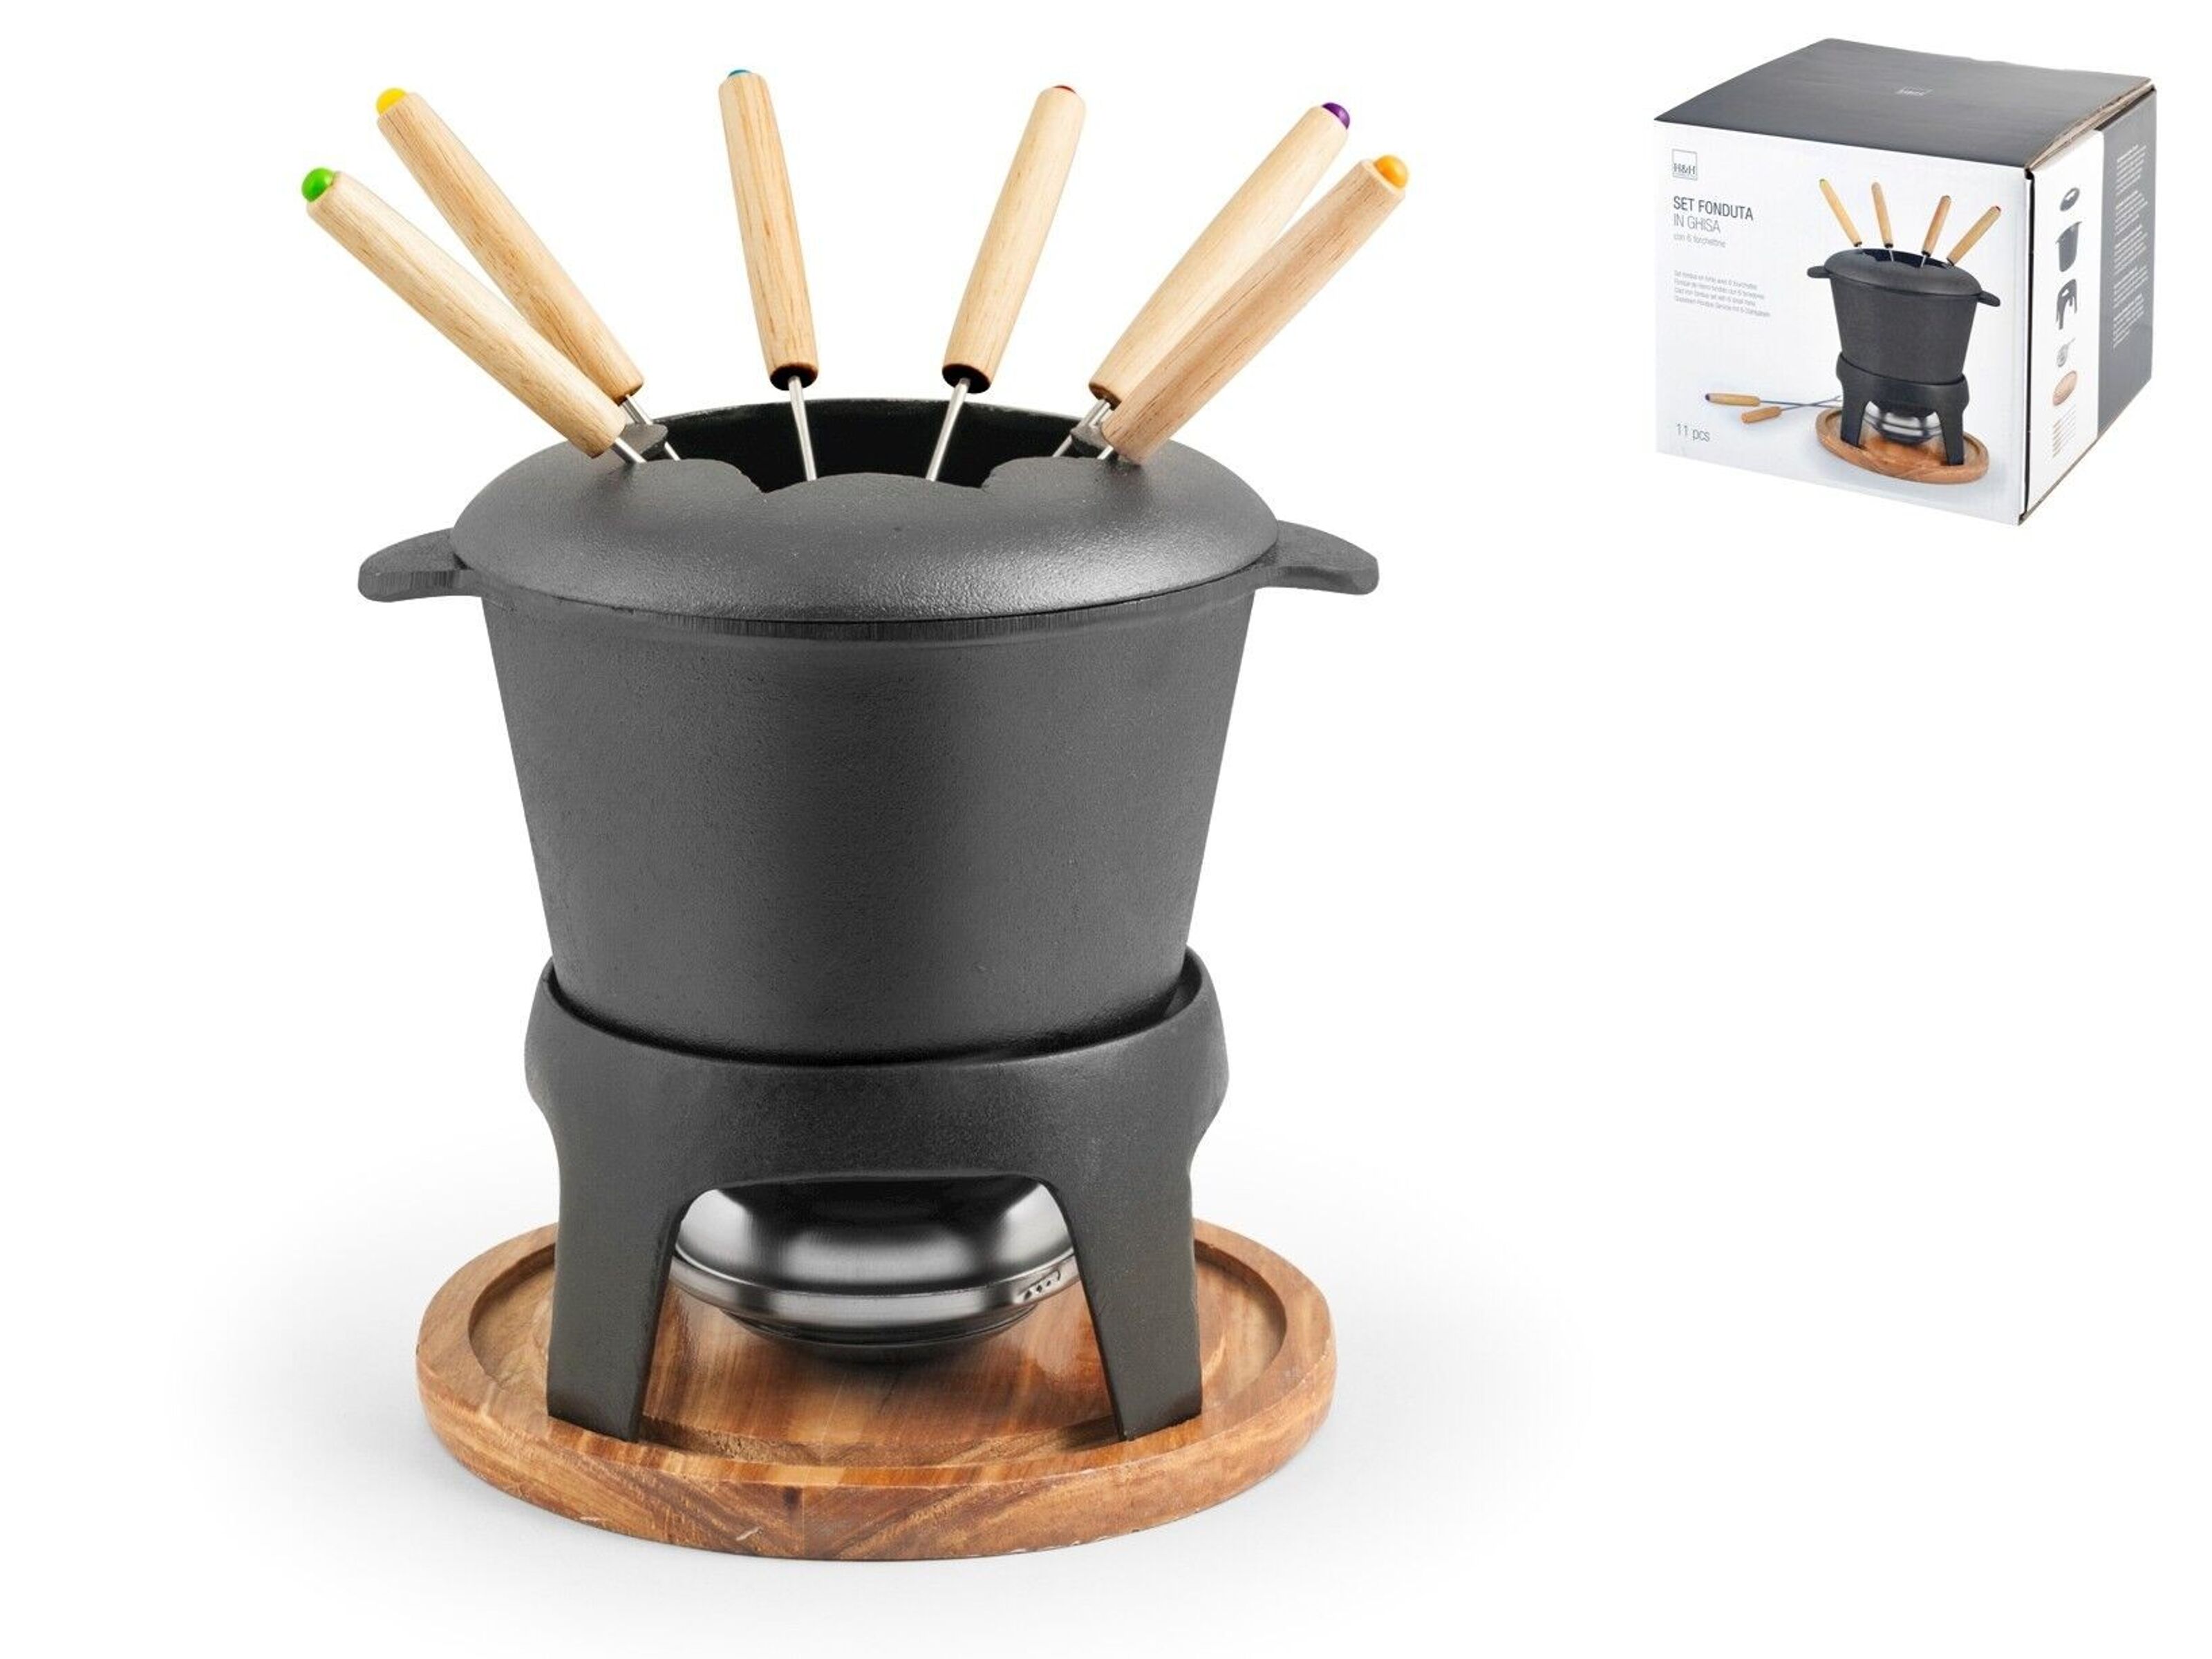 6 fondue 1 h of: base. cast stainless stove; set Consisting 1 21x16x10 with wholesale cast iron wooden fuel 11-piece iron steel cm handle; saucepan wooden forks in Buy with paste with